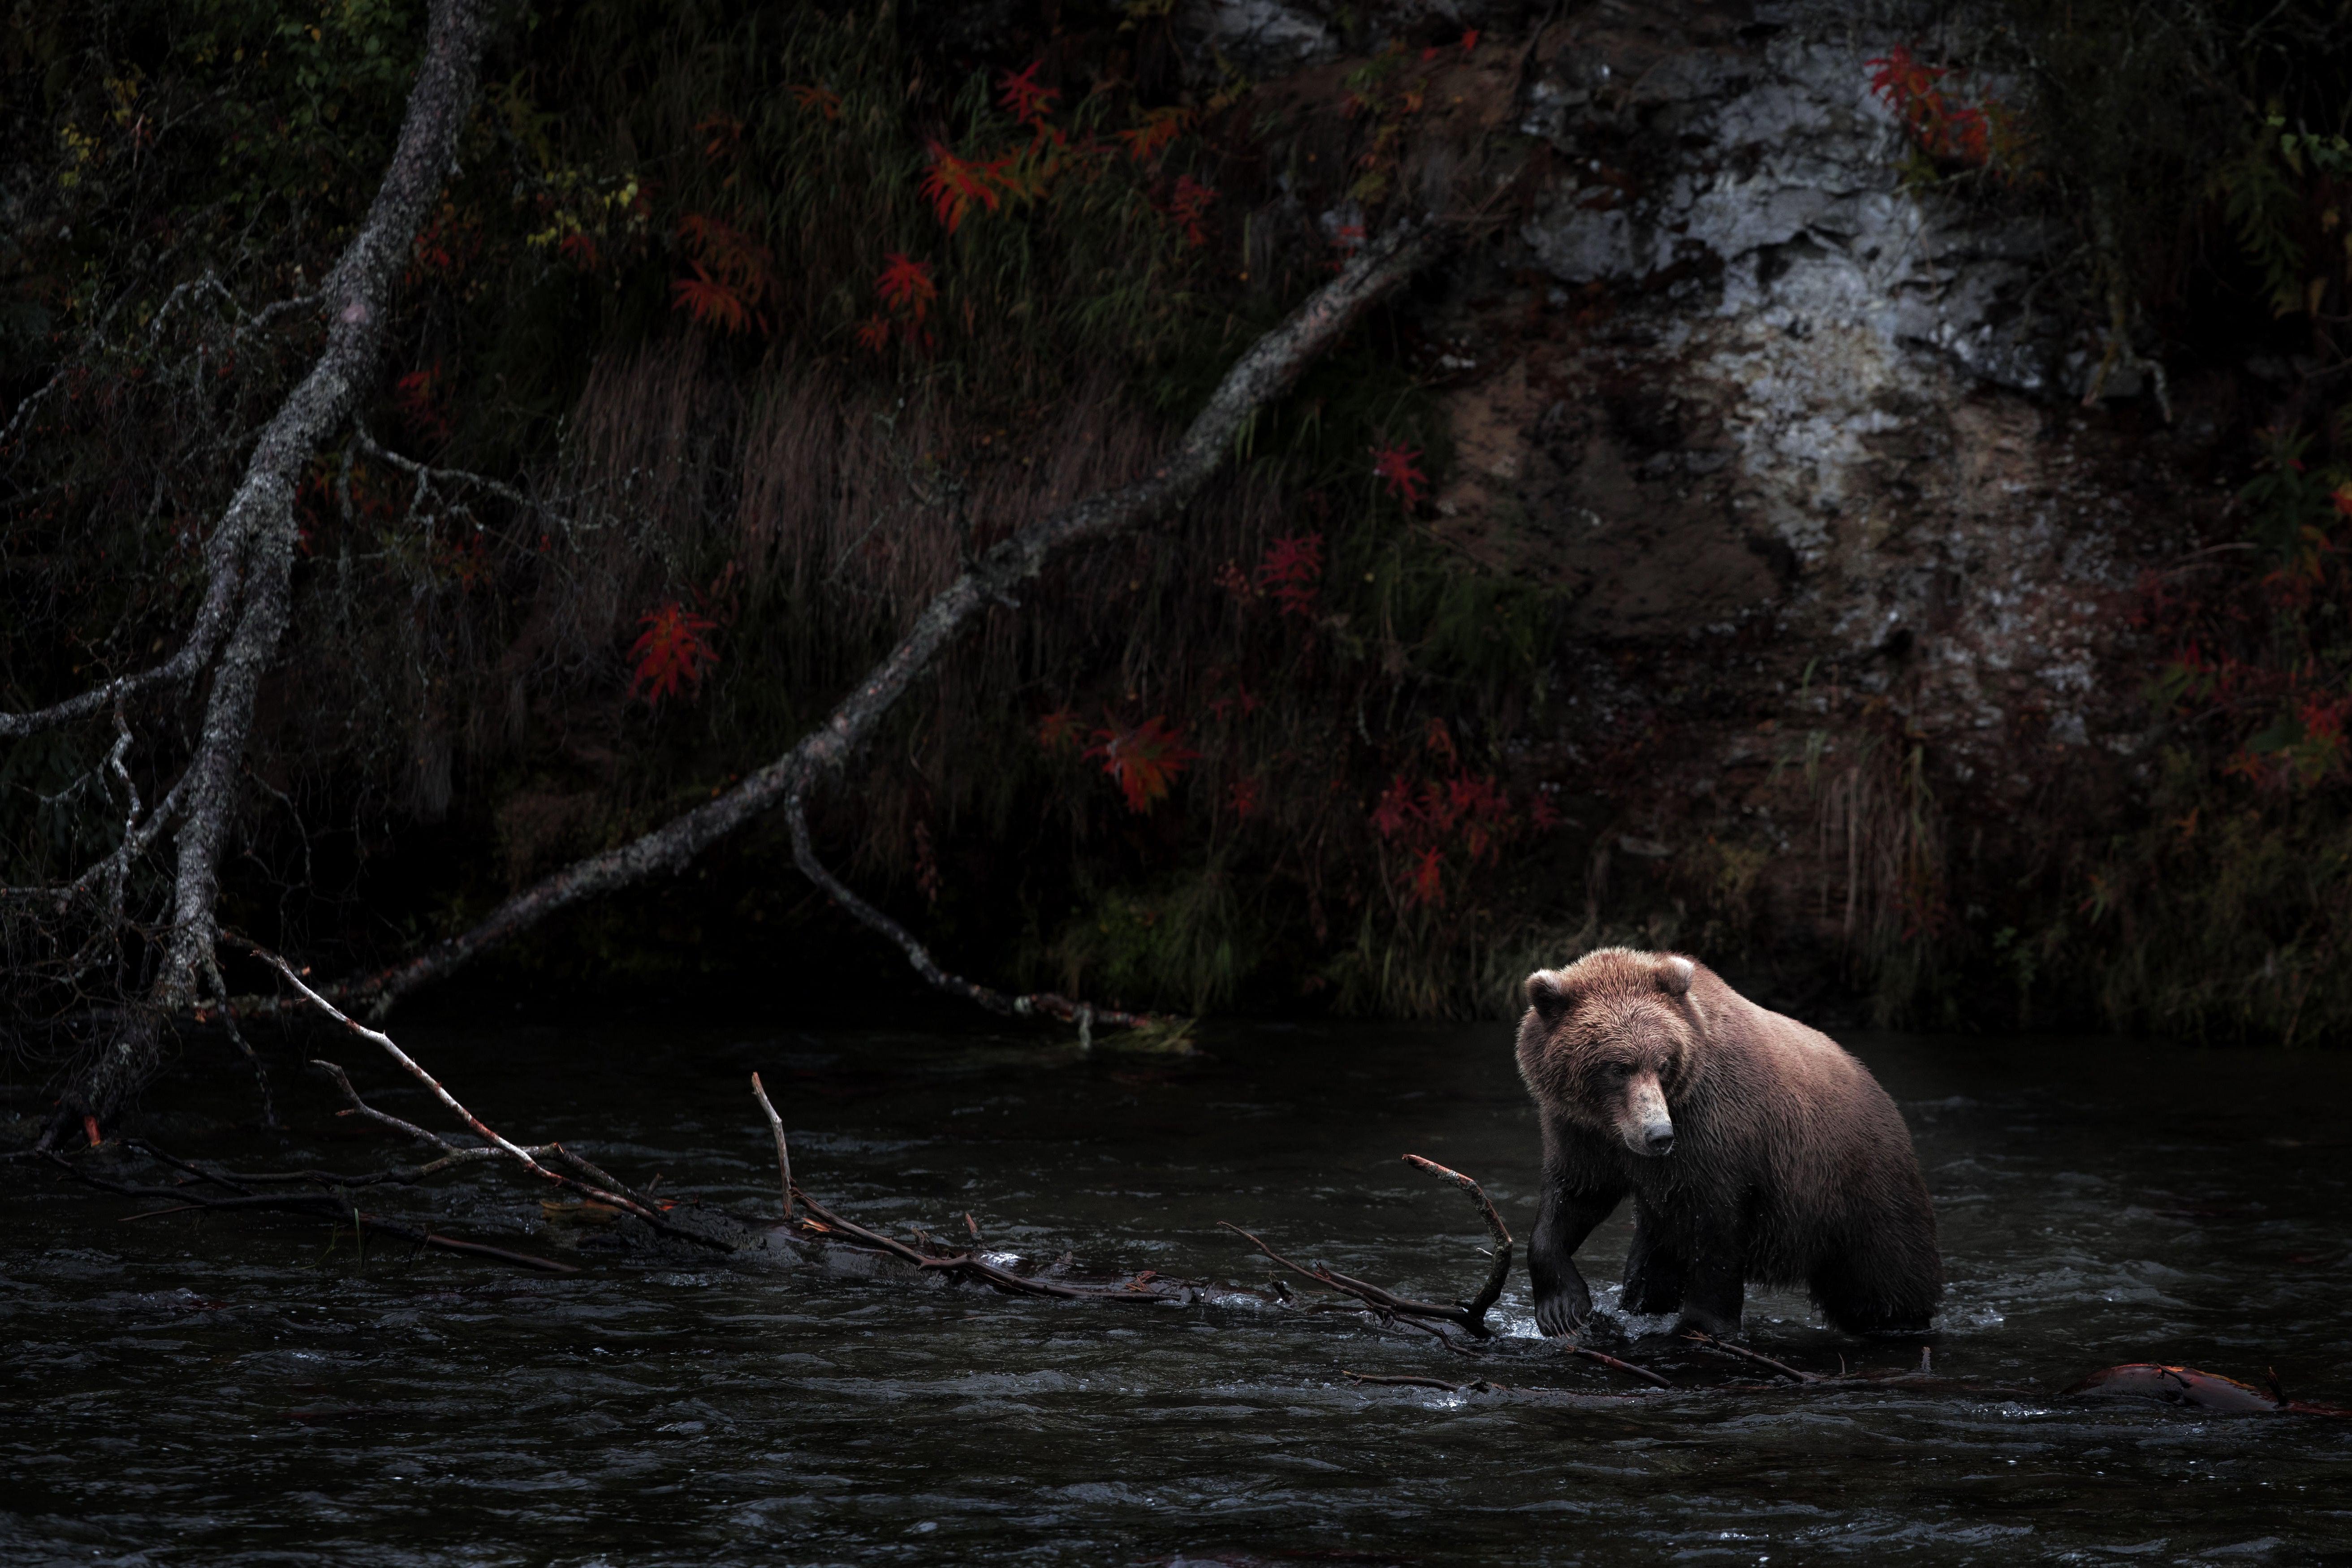 Large brown bear in a stream in the woods with low daylight